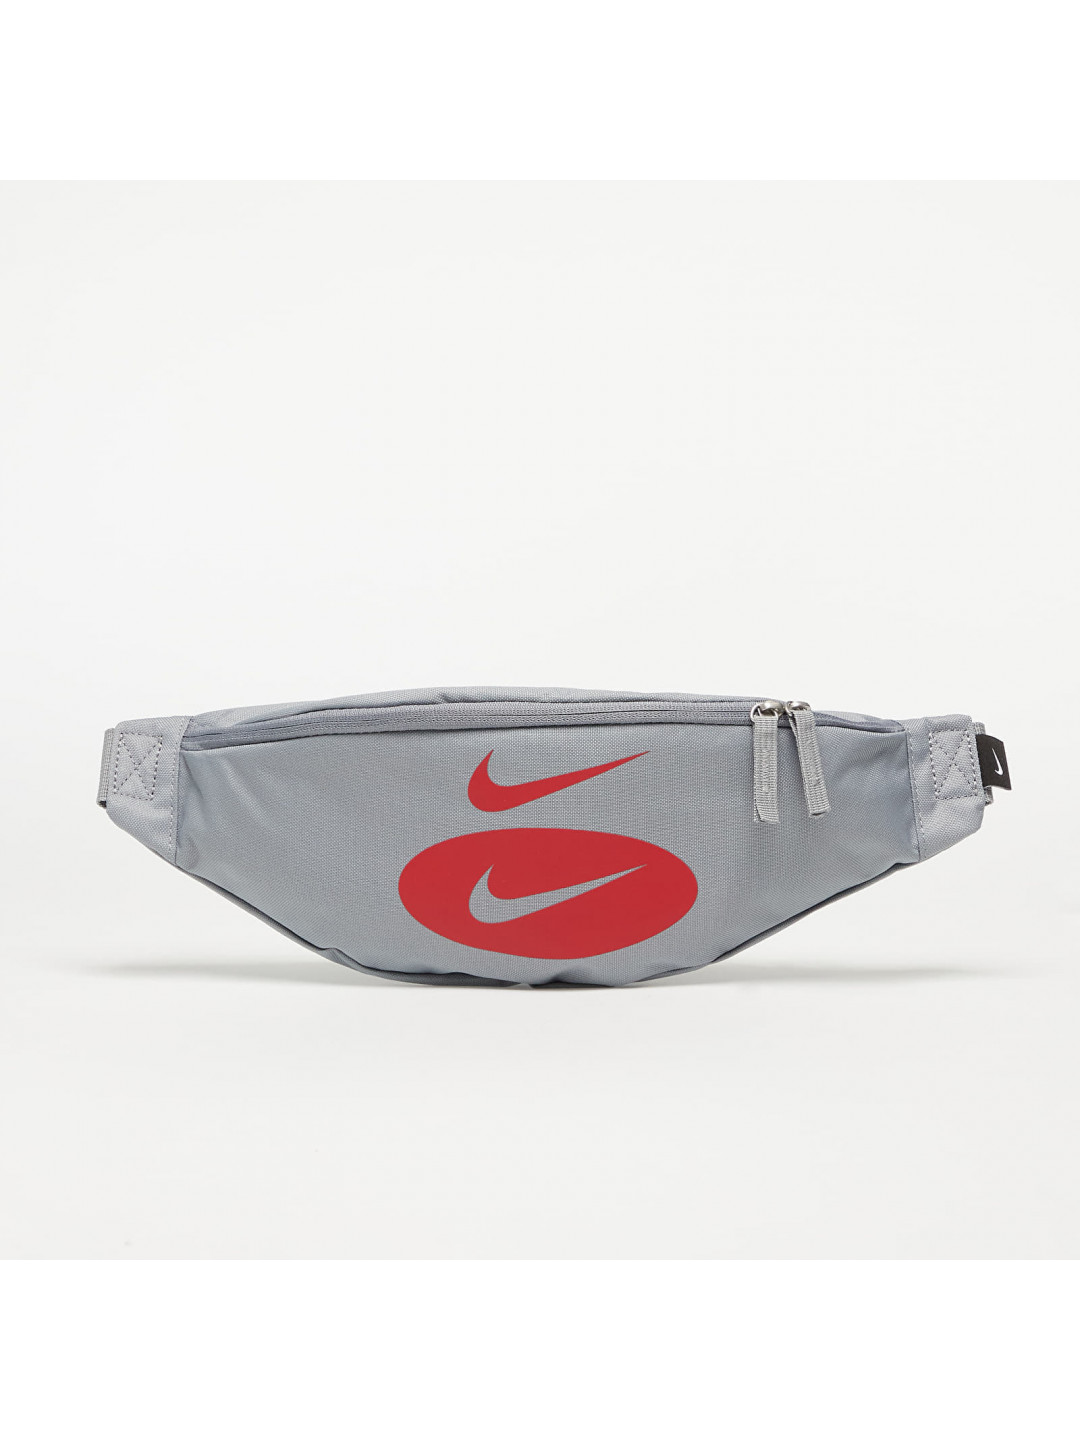 Nike Heritage Hip Pack Particle Grey University Red